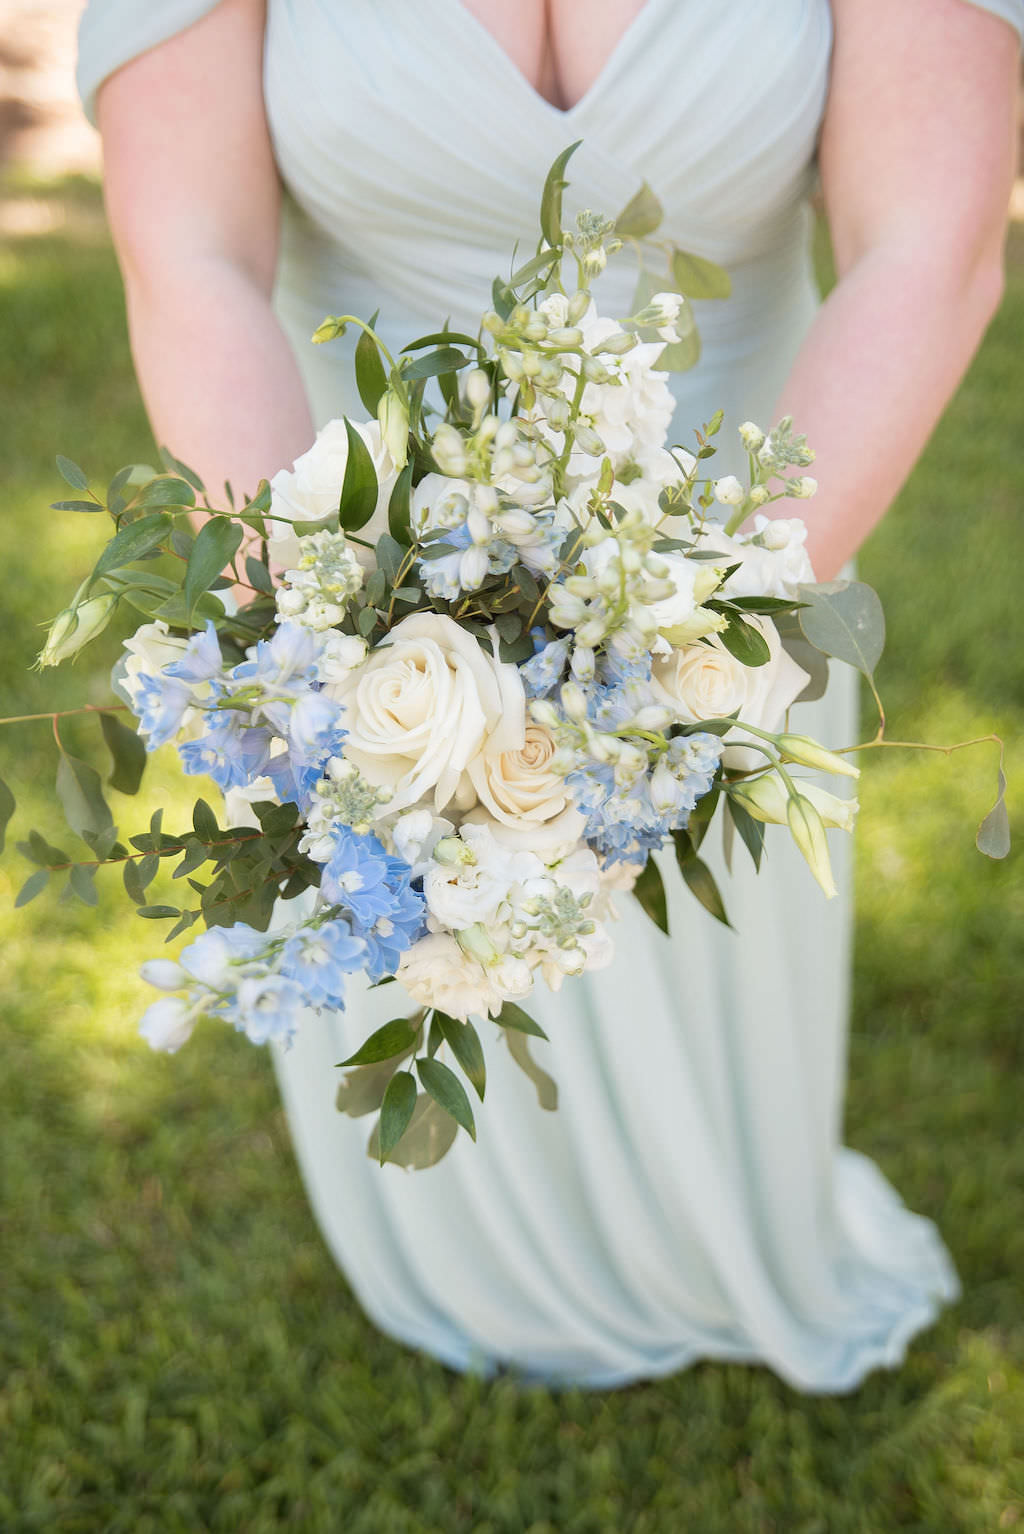 Bridesmaids in Long Flowy Classic Boho Style Powder Blue Dress Holding Ivory, White, Blue and Greenery Floral Bouquet | Tampa Bay Kristen Marie Photography | Bridesmaid Dress Shop Nikki's Glitz and Glam